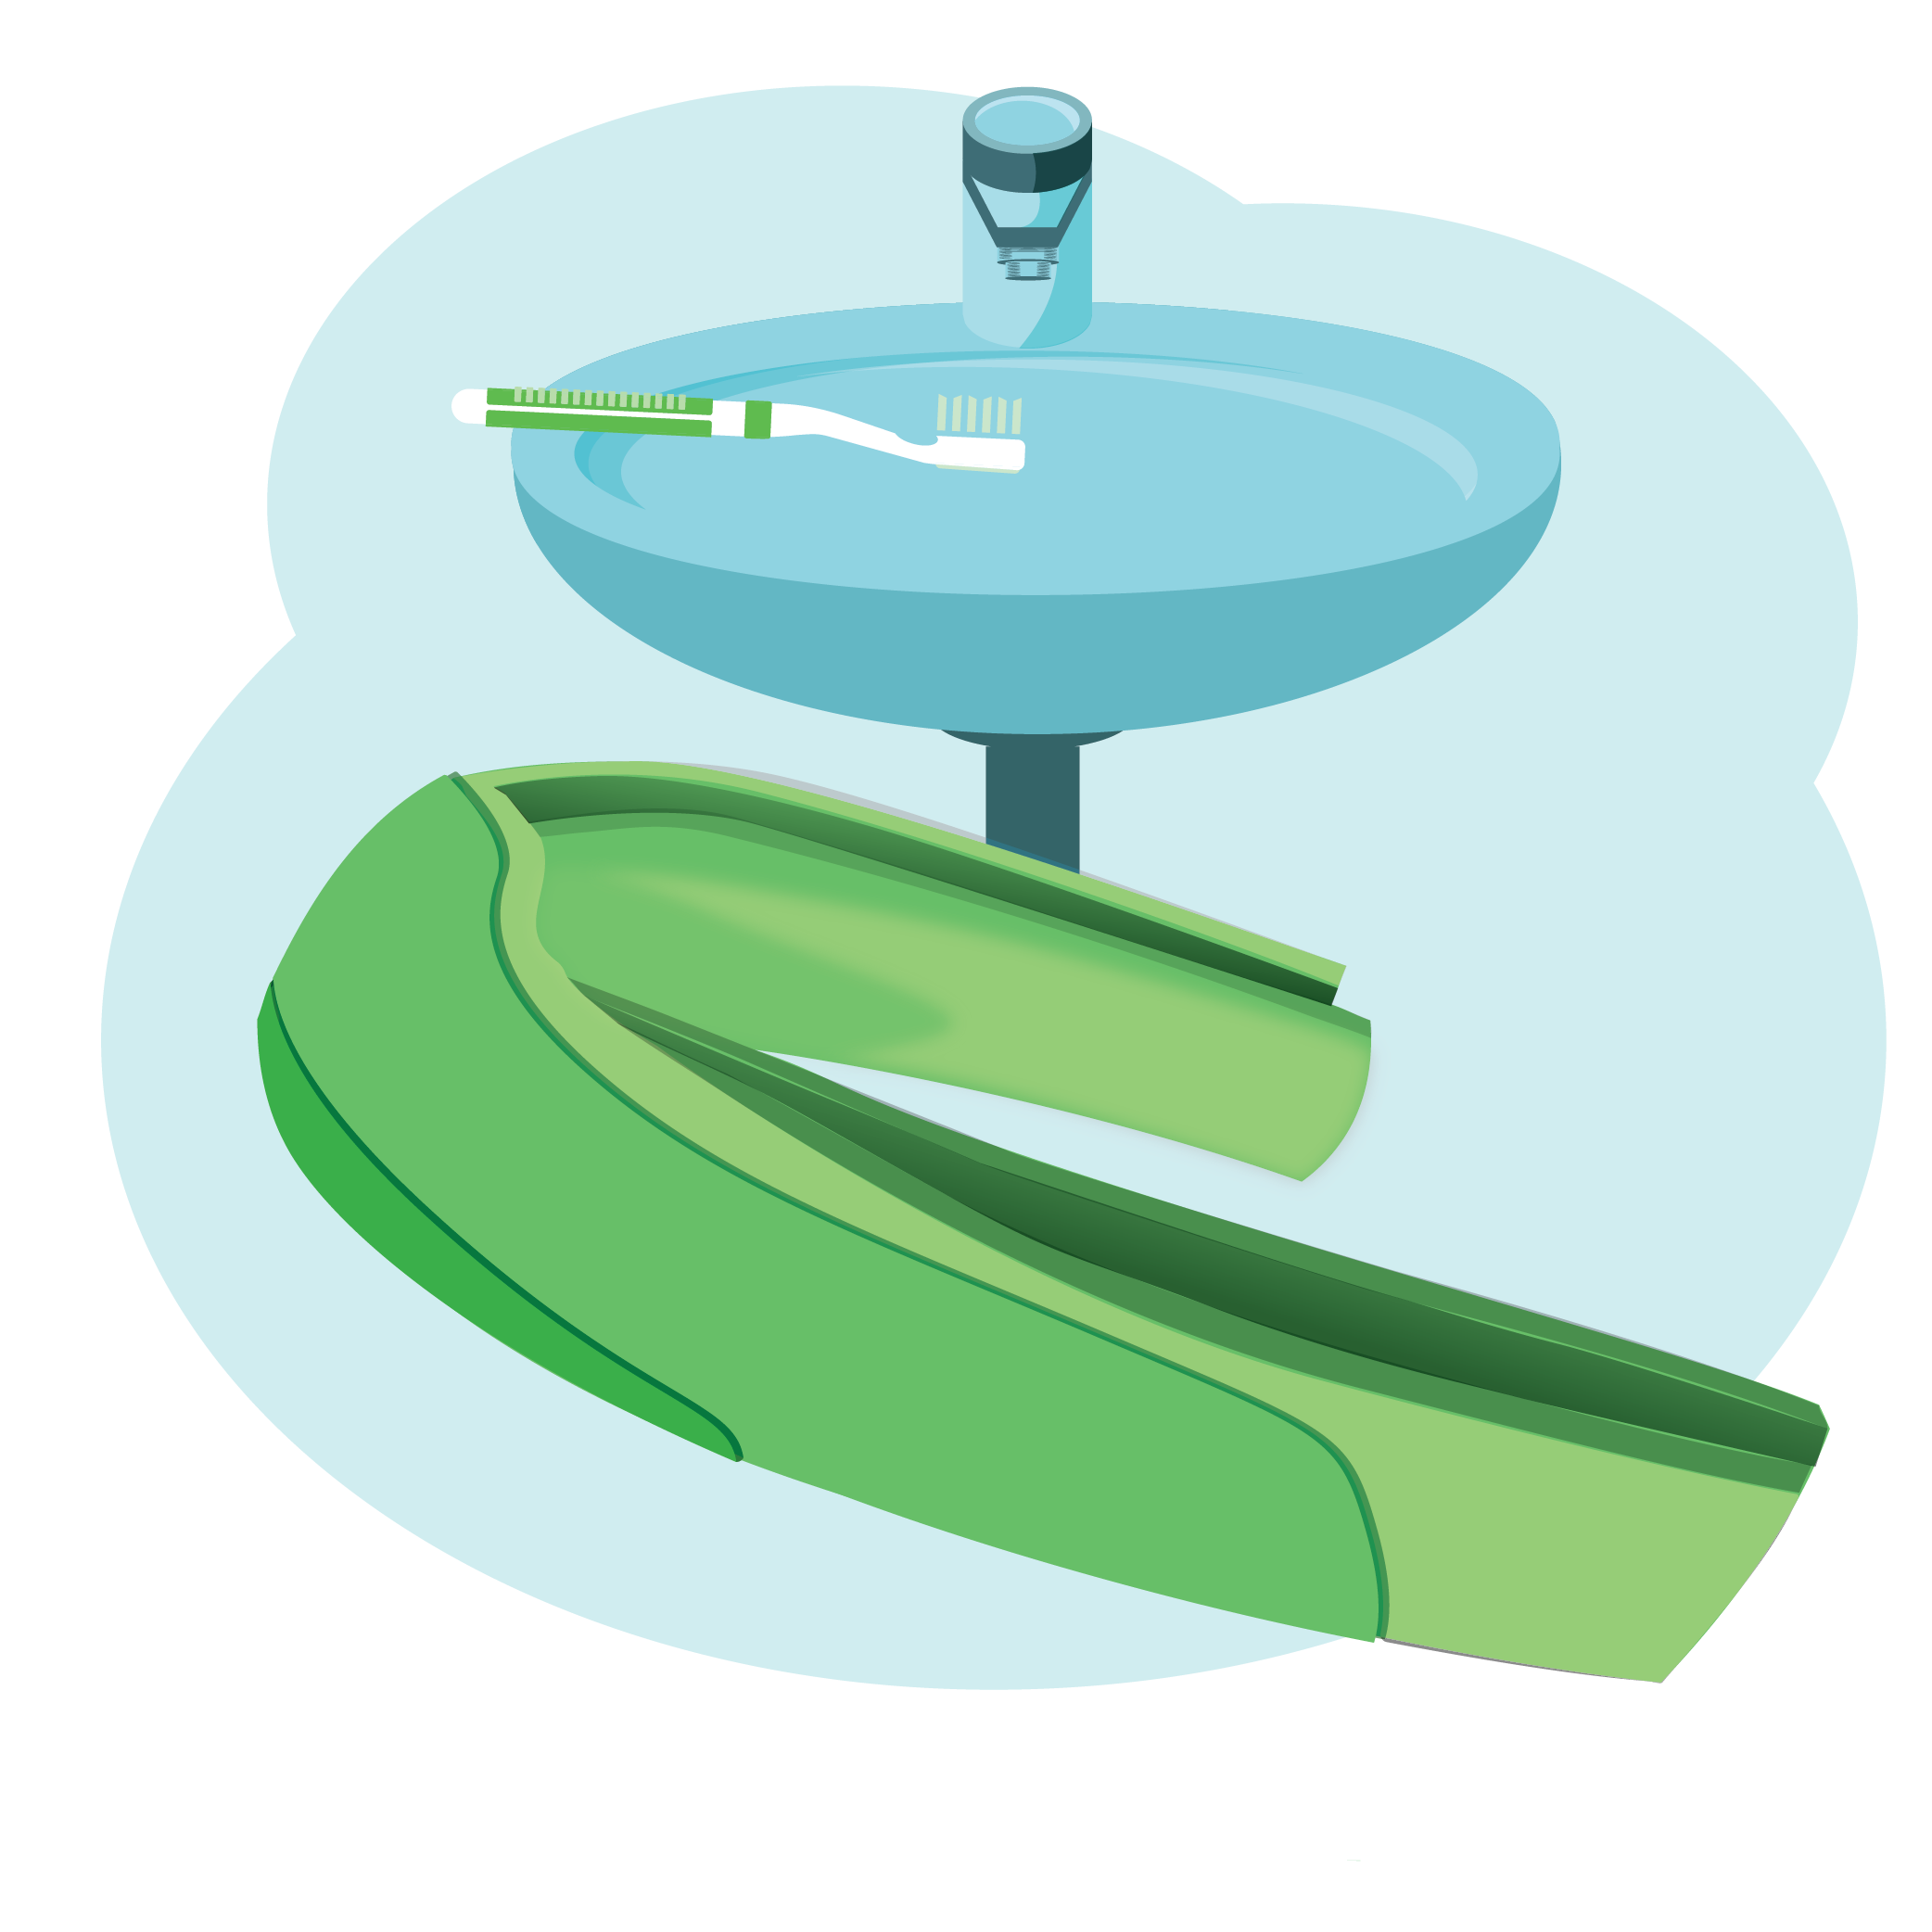 Illustration of mouth guard and sink with a toothbrush